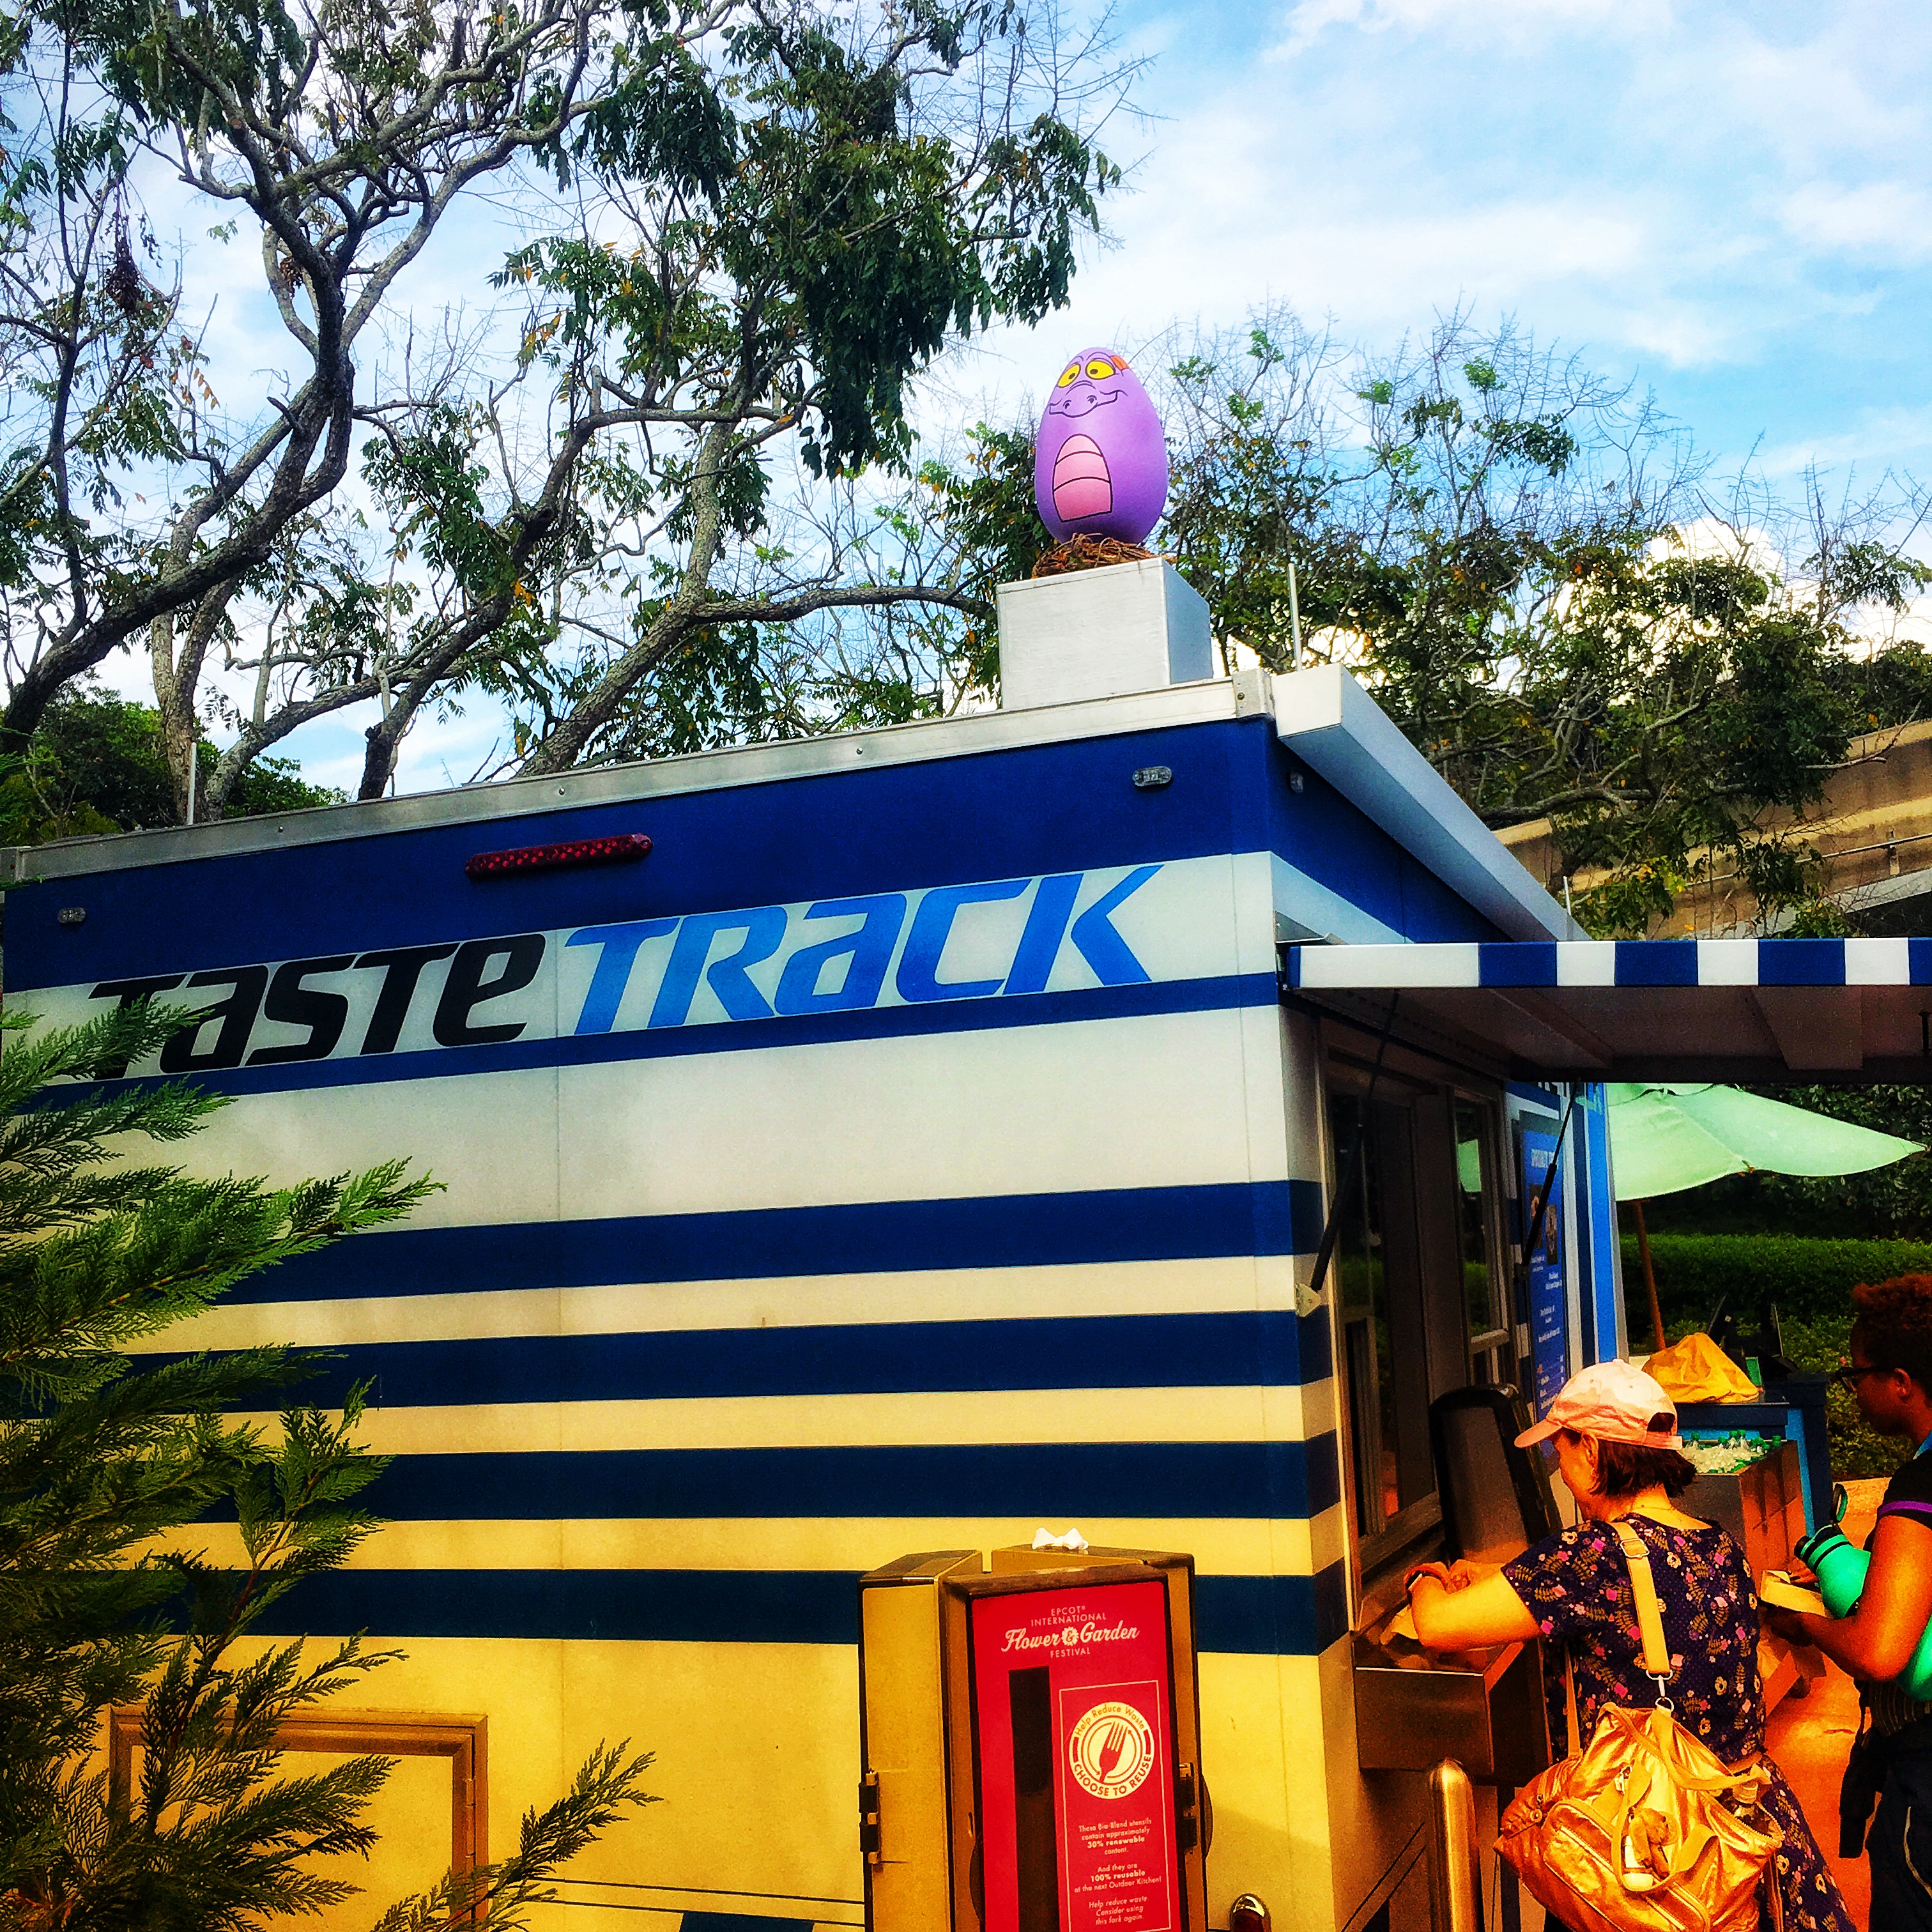 Taste Track at Test Track Epcot Figment. Keep reading learn more about the Epcot Egg Hunt also know as Egg-Stravaganza Scavenger Hunt.